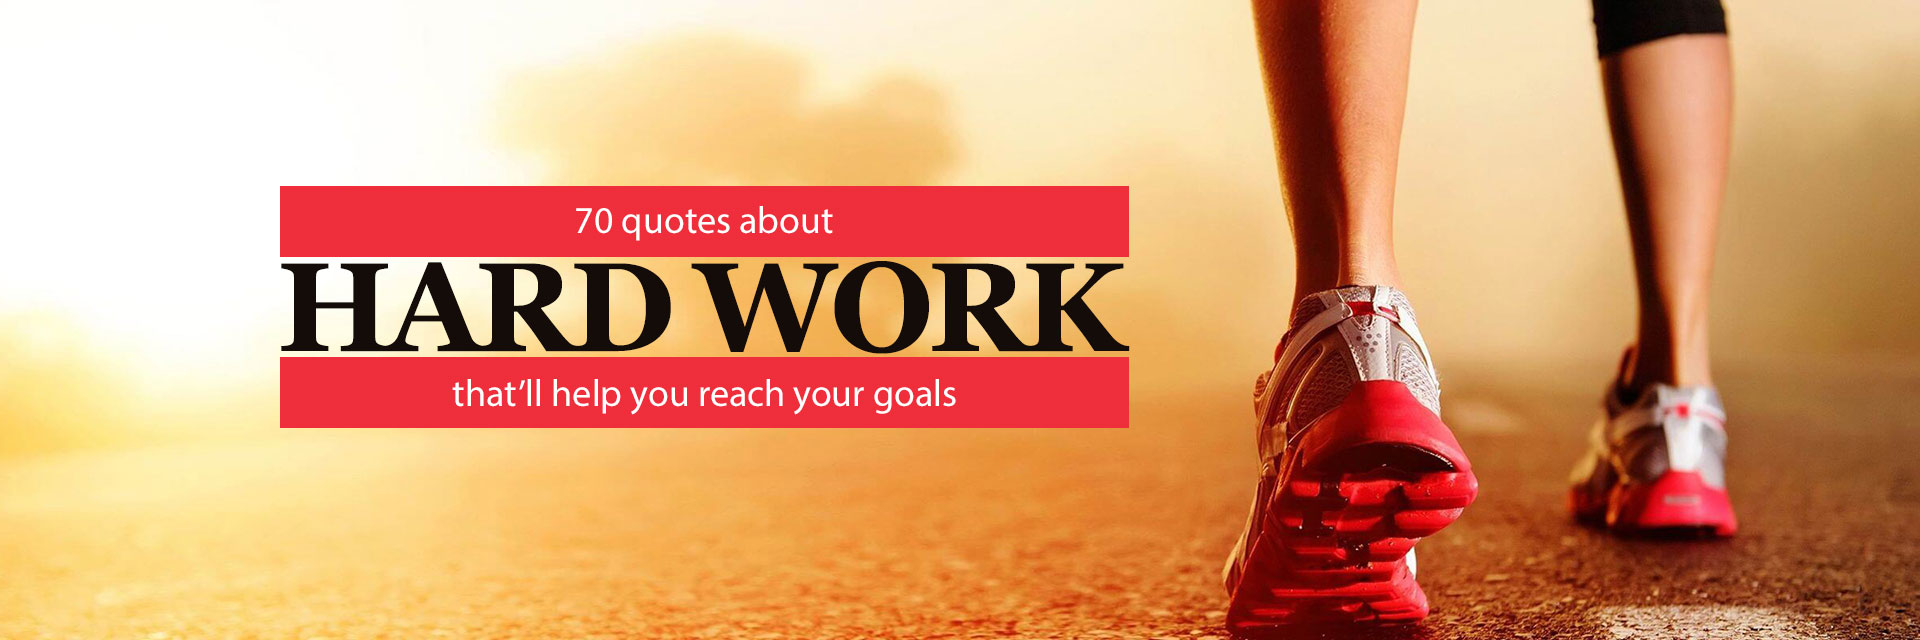 70 Quotes About Hard Work That'll Help You Reach Your Goals